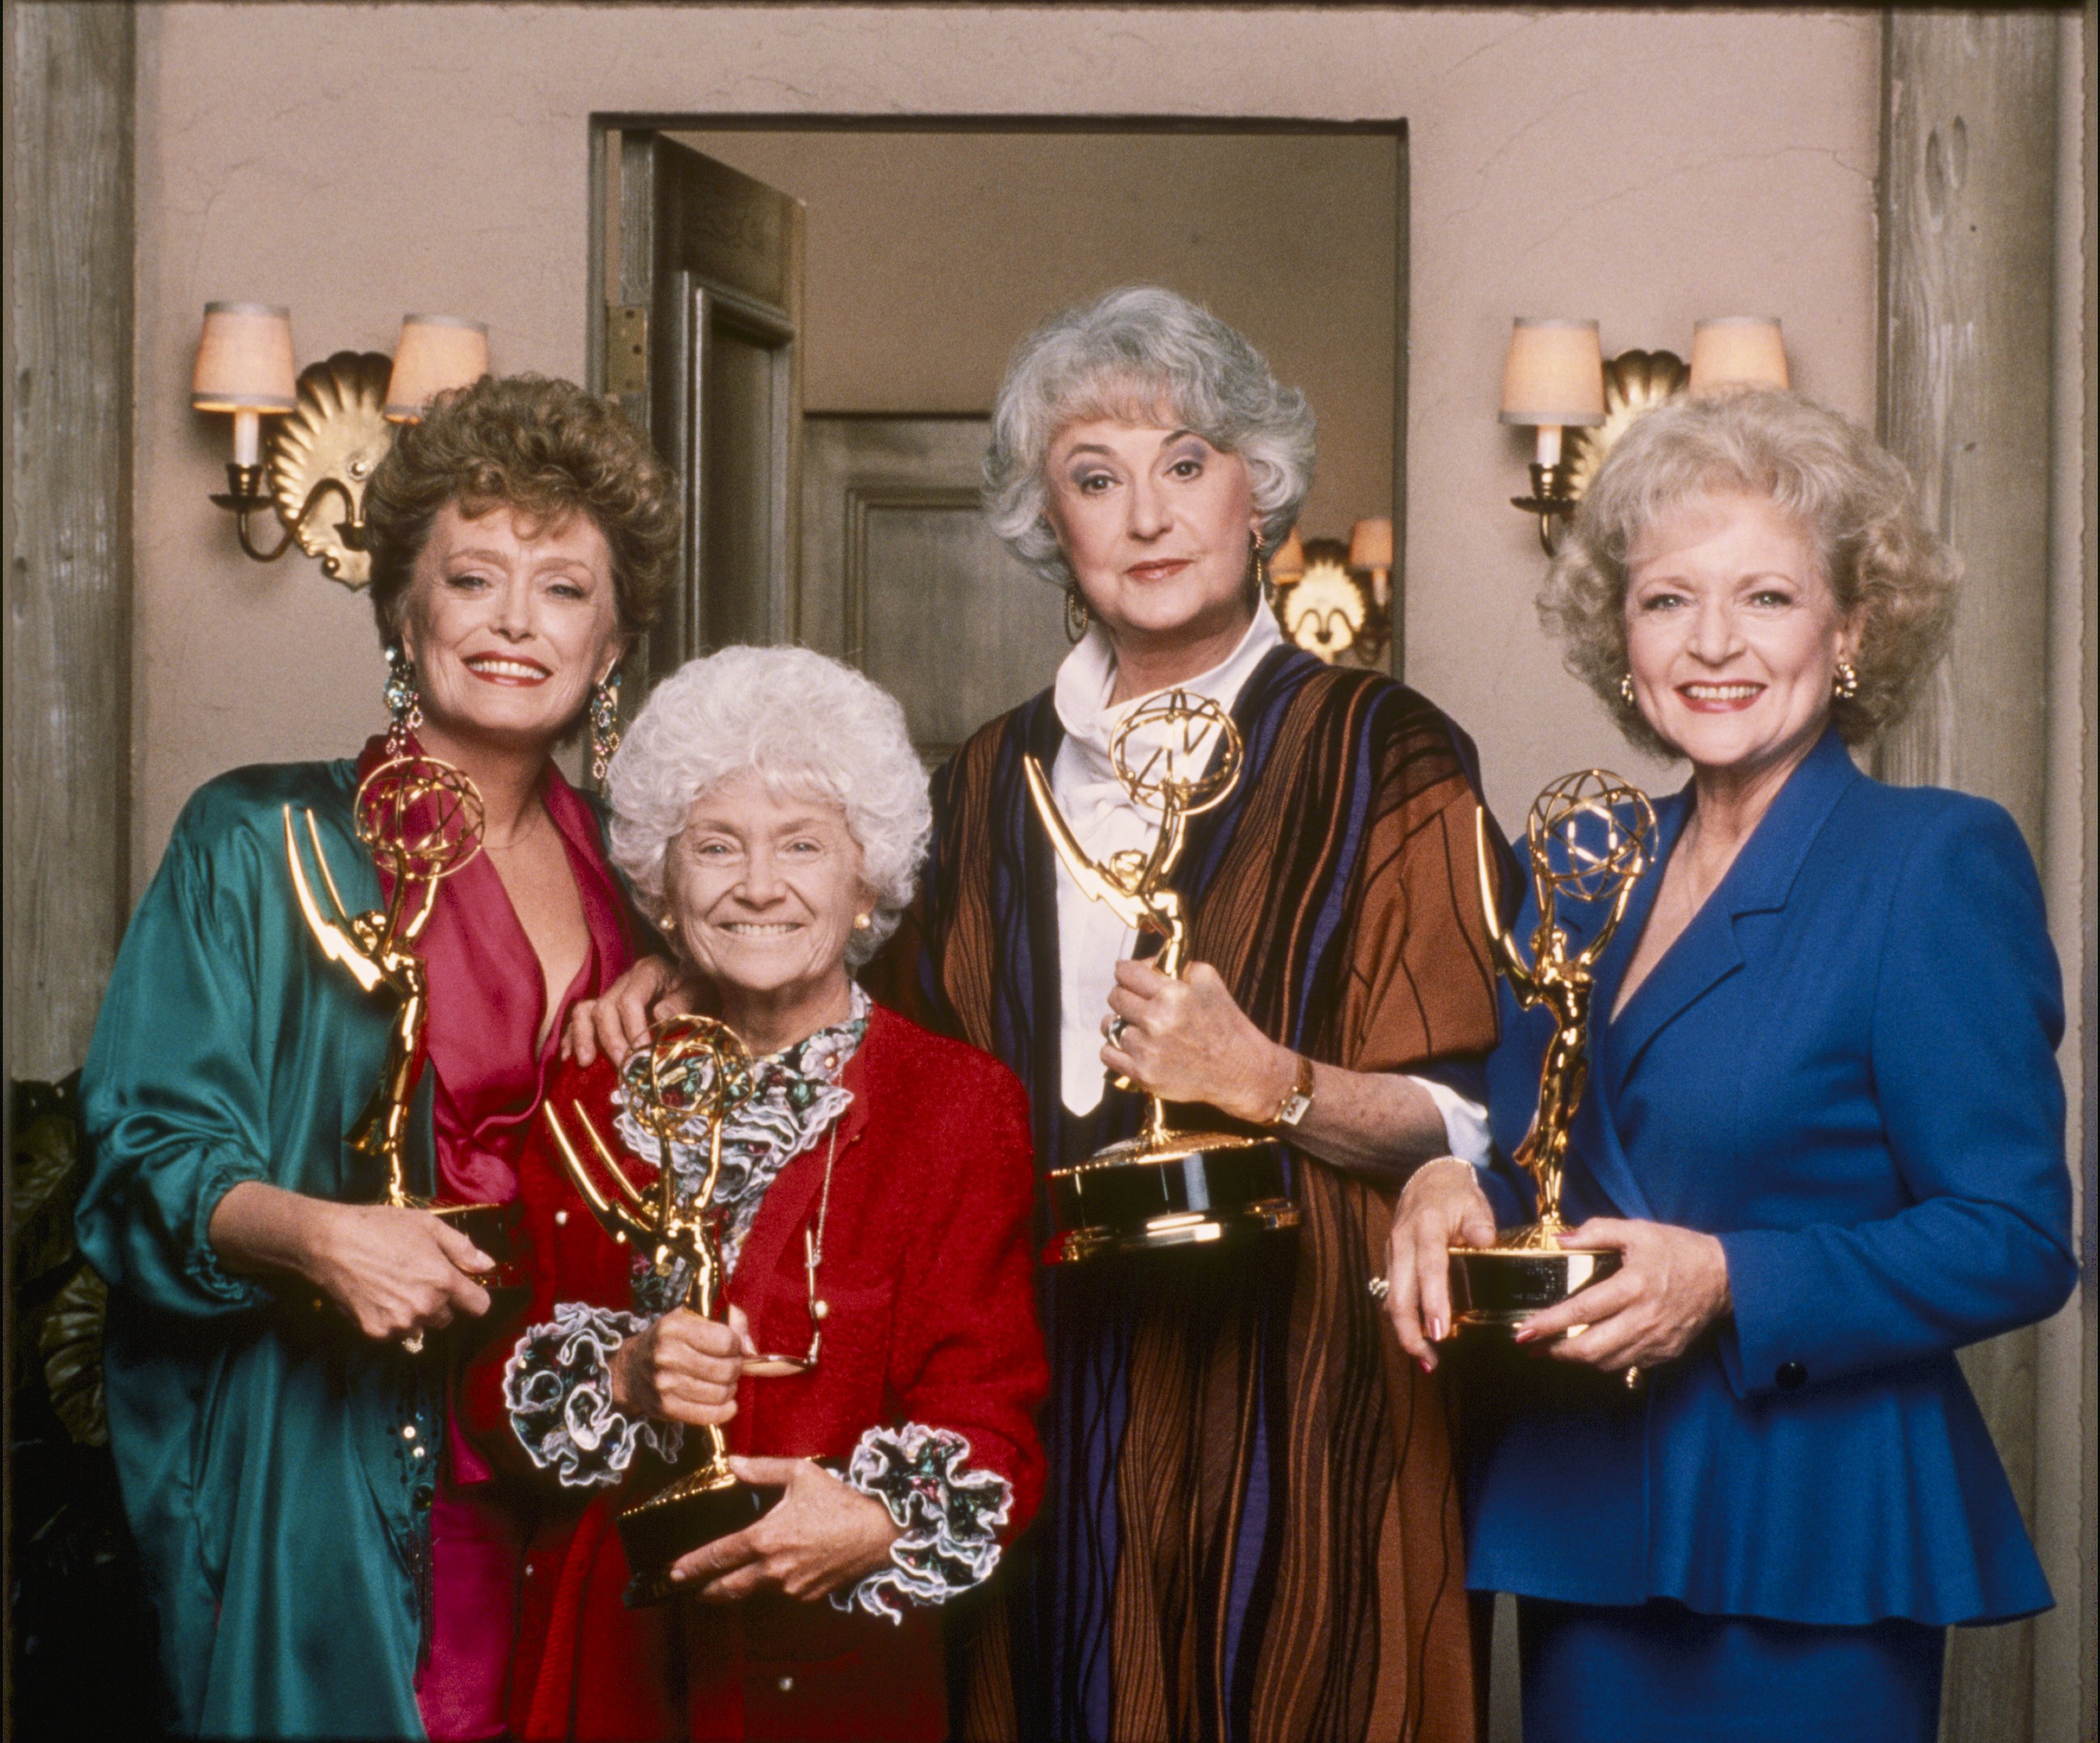  Rue McClanahan, Estelle Getty, Bea Arthur, and  Betty White with their Emmys for Outstanding Lead Actress in a Comedy Series | Photo: Getty Images